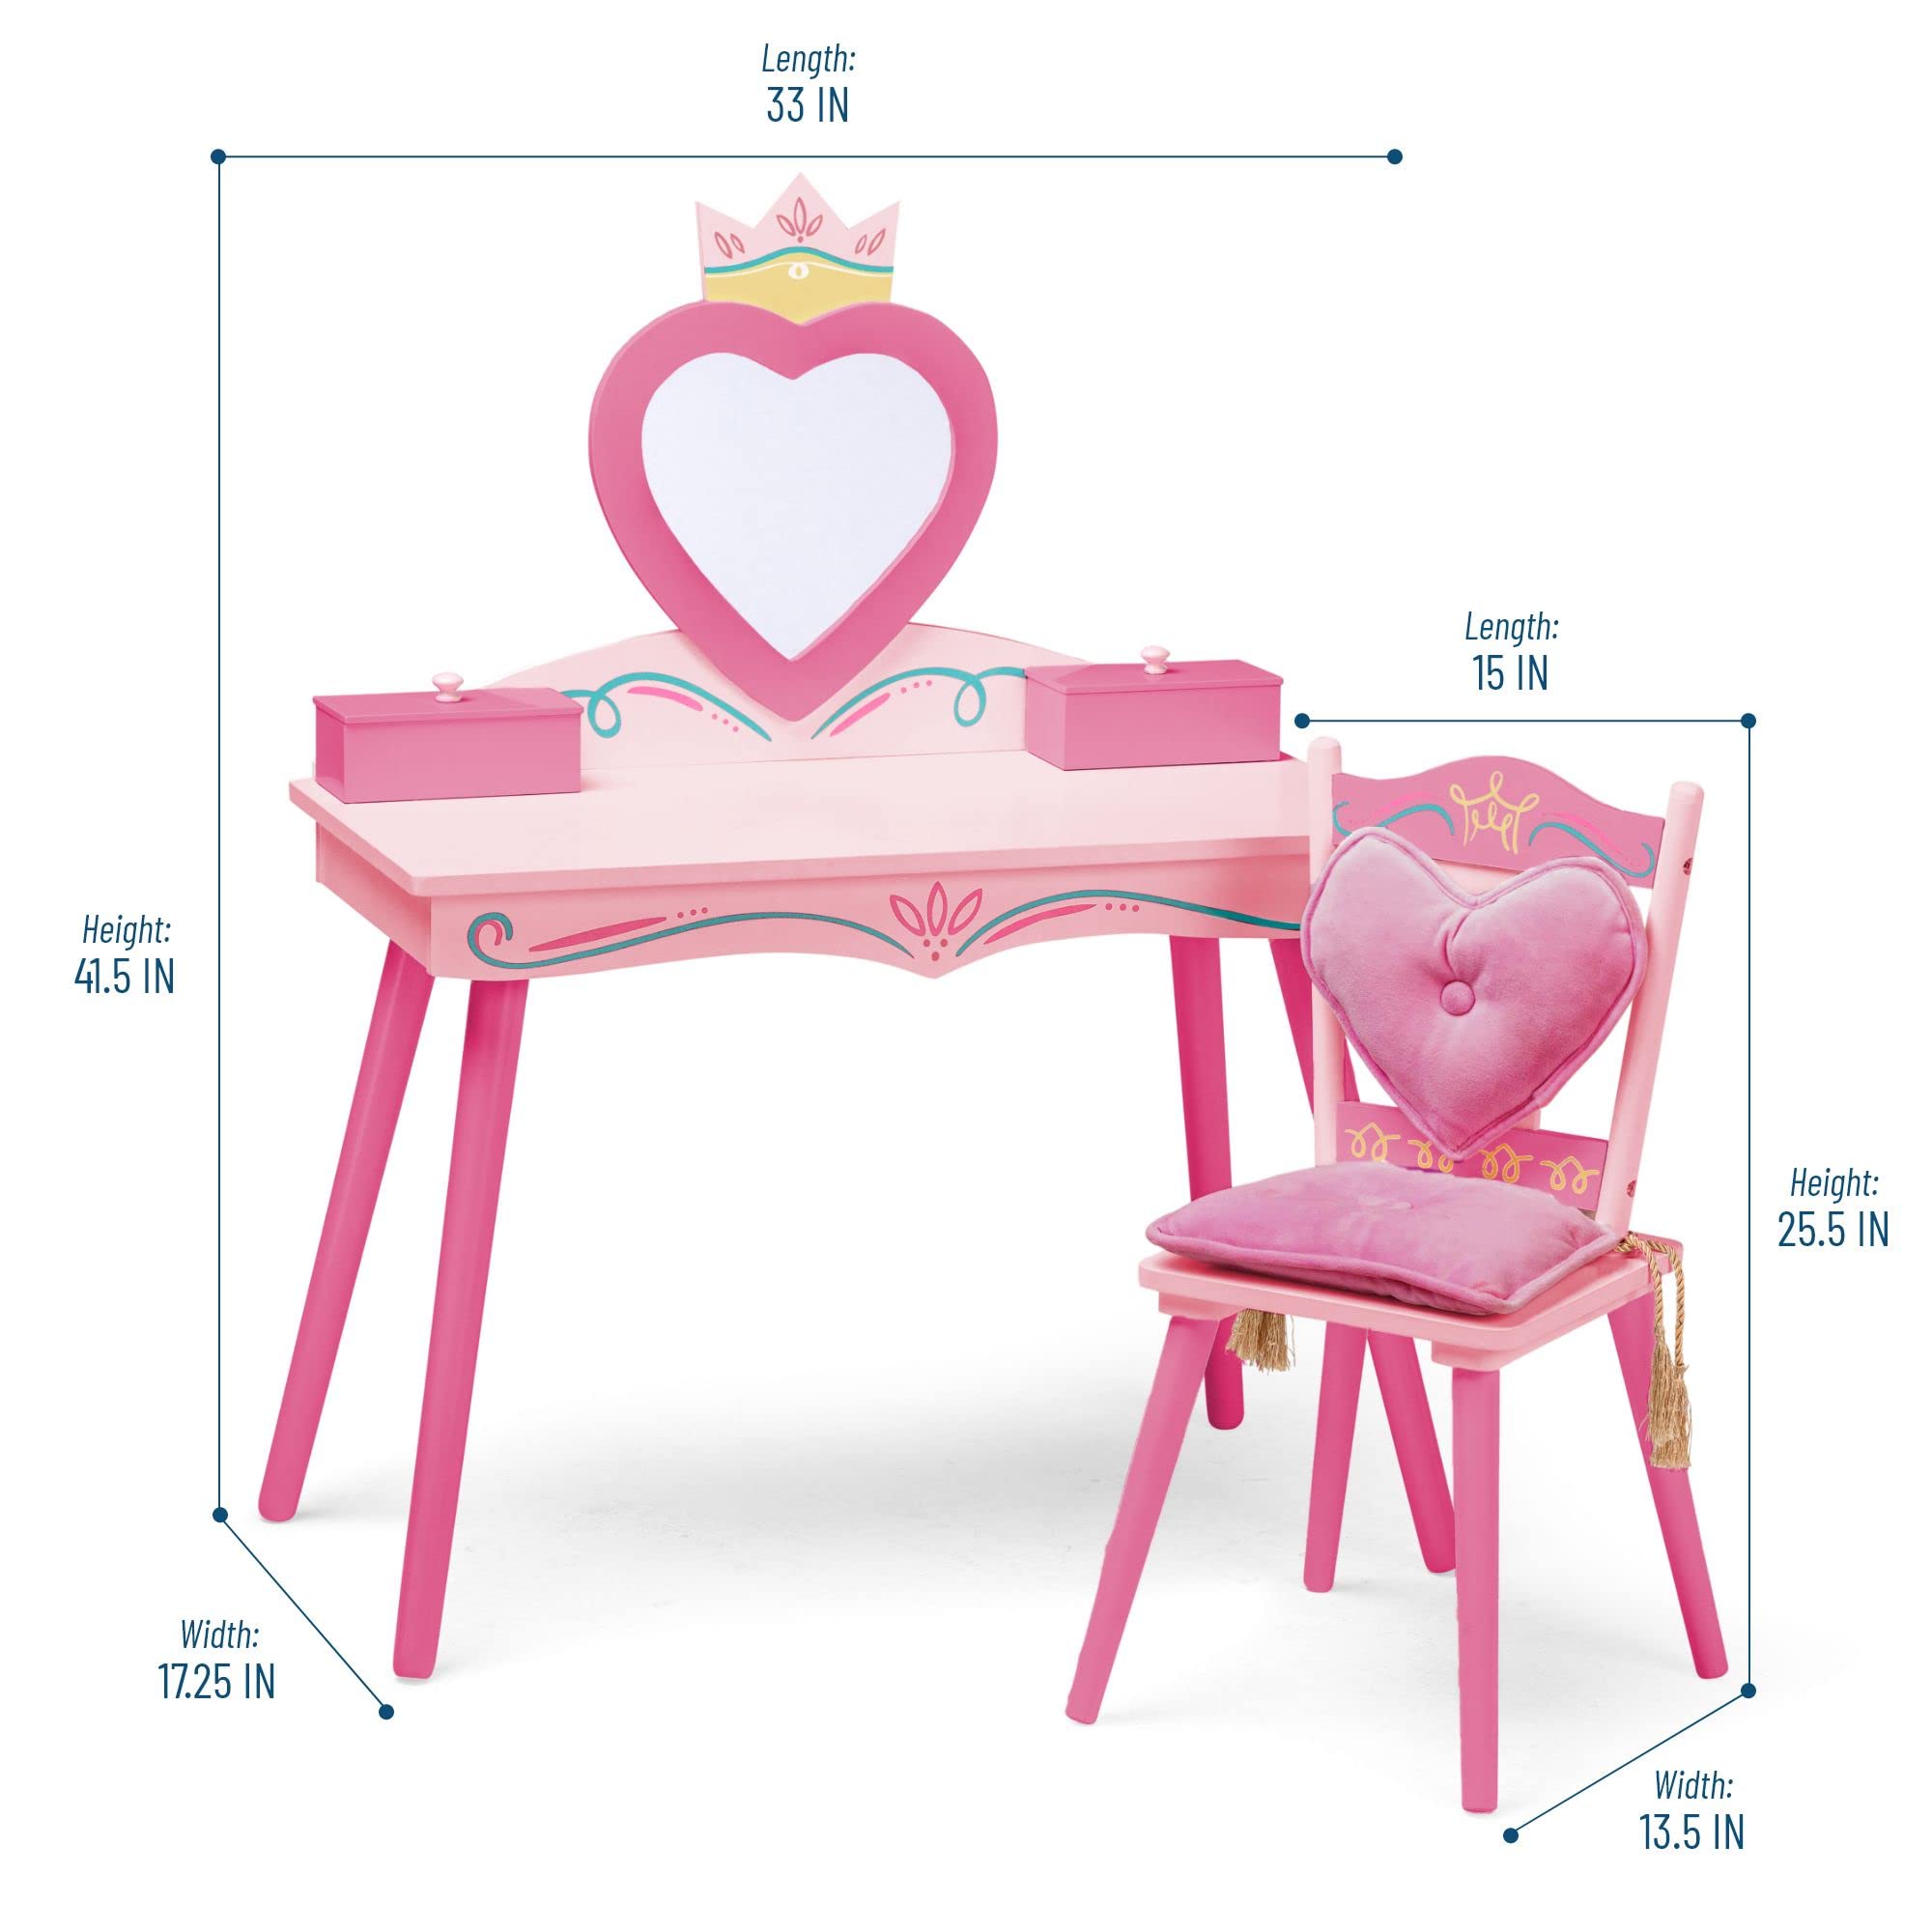 Wildkin Kids Princess Wooden Vanity and Chair Set for Girls, Vanity Features Mirror and Attached Jewelry Box and Music Box, Includes Matching Chair with Removable Backrest and Seat Cushion (Pink)